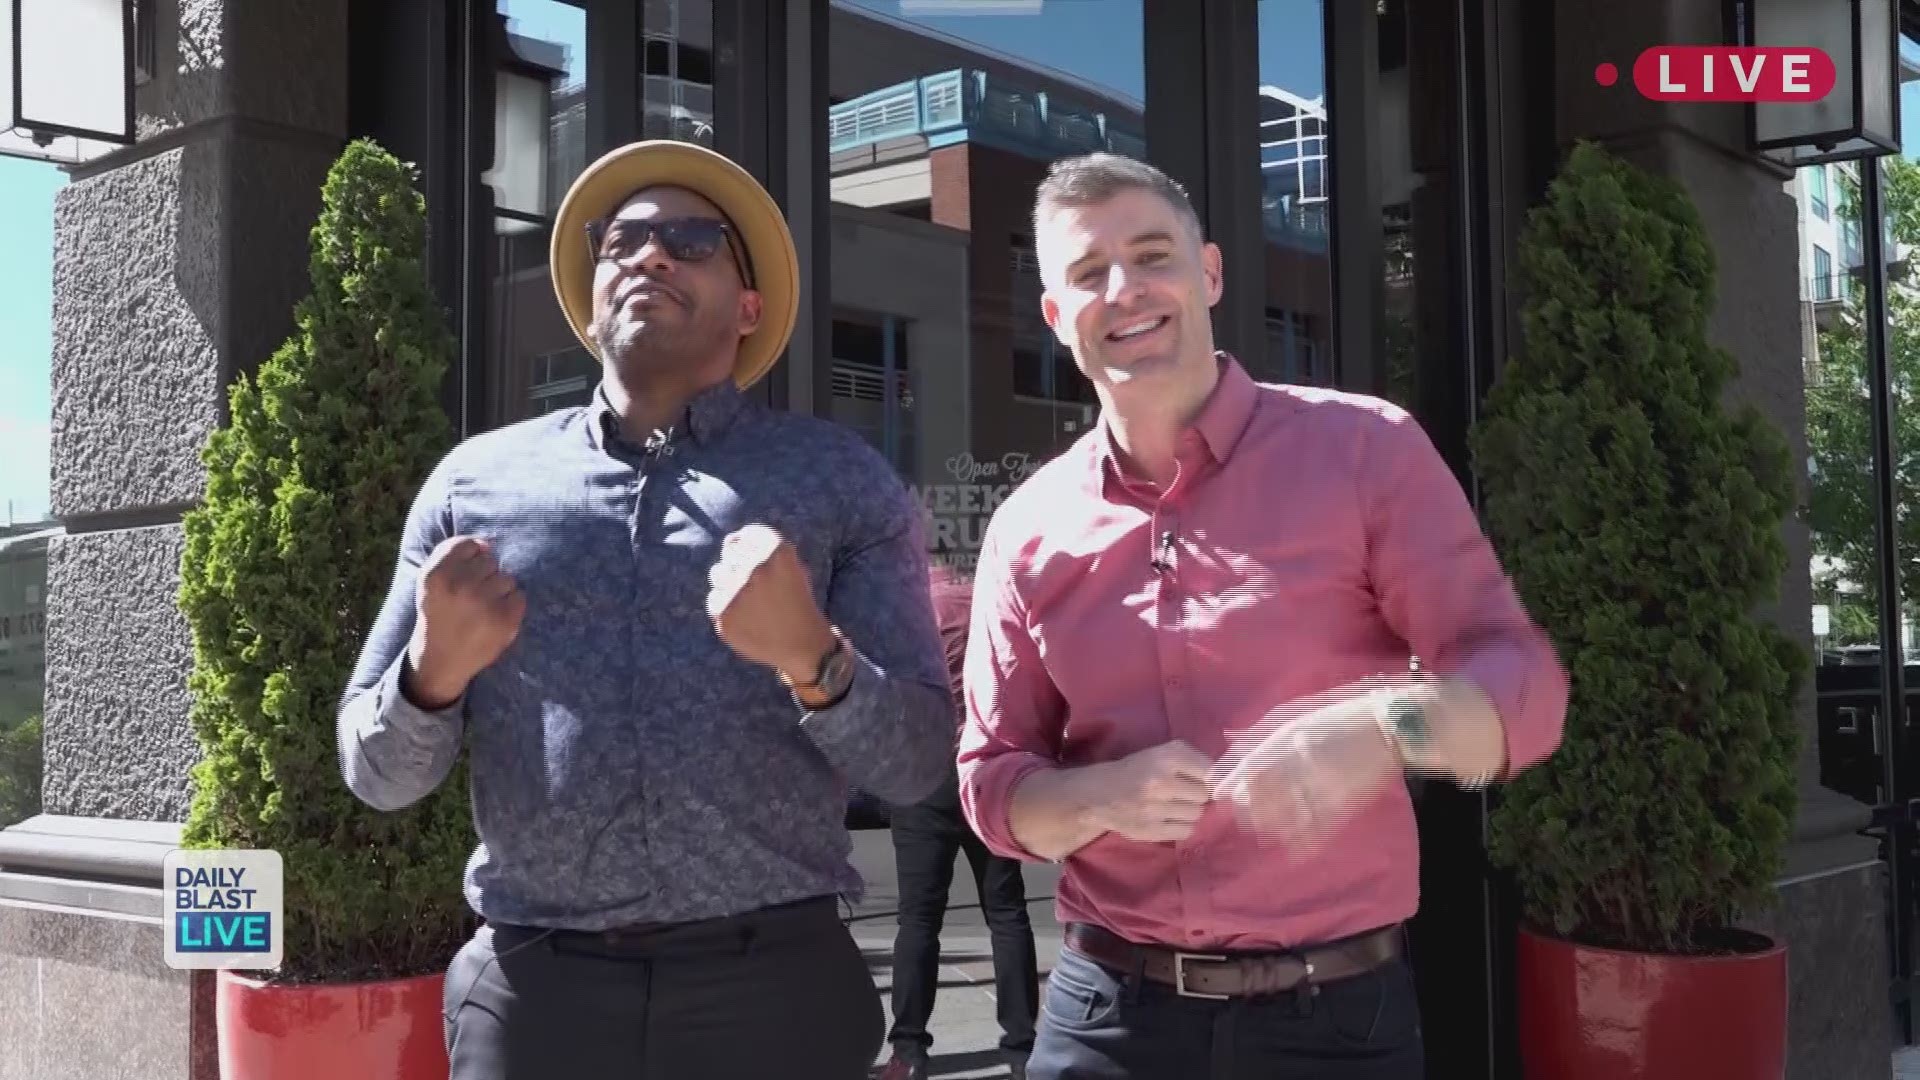 Daily Blast LIVE buddies Al Jackson and Jeff Schroeder are the putting their taste buds to the test for National Burger Month. Two Man Crew is back this week trying the impossible: picking the burger made from plants. The 'Impossible Burger" is a meatless